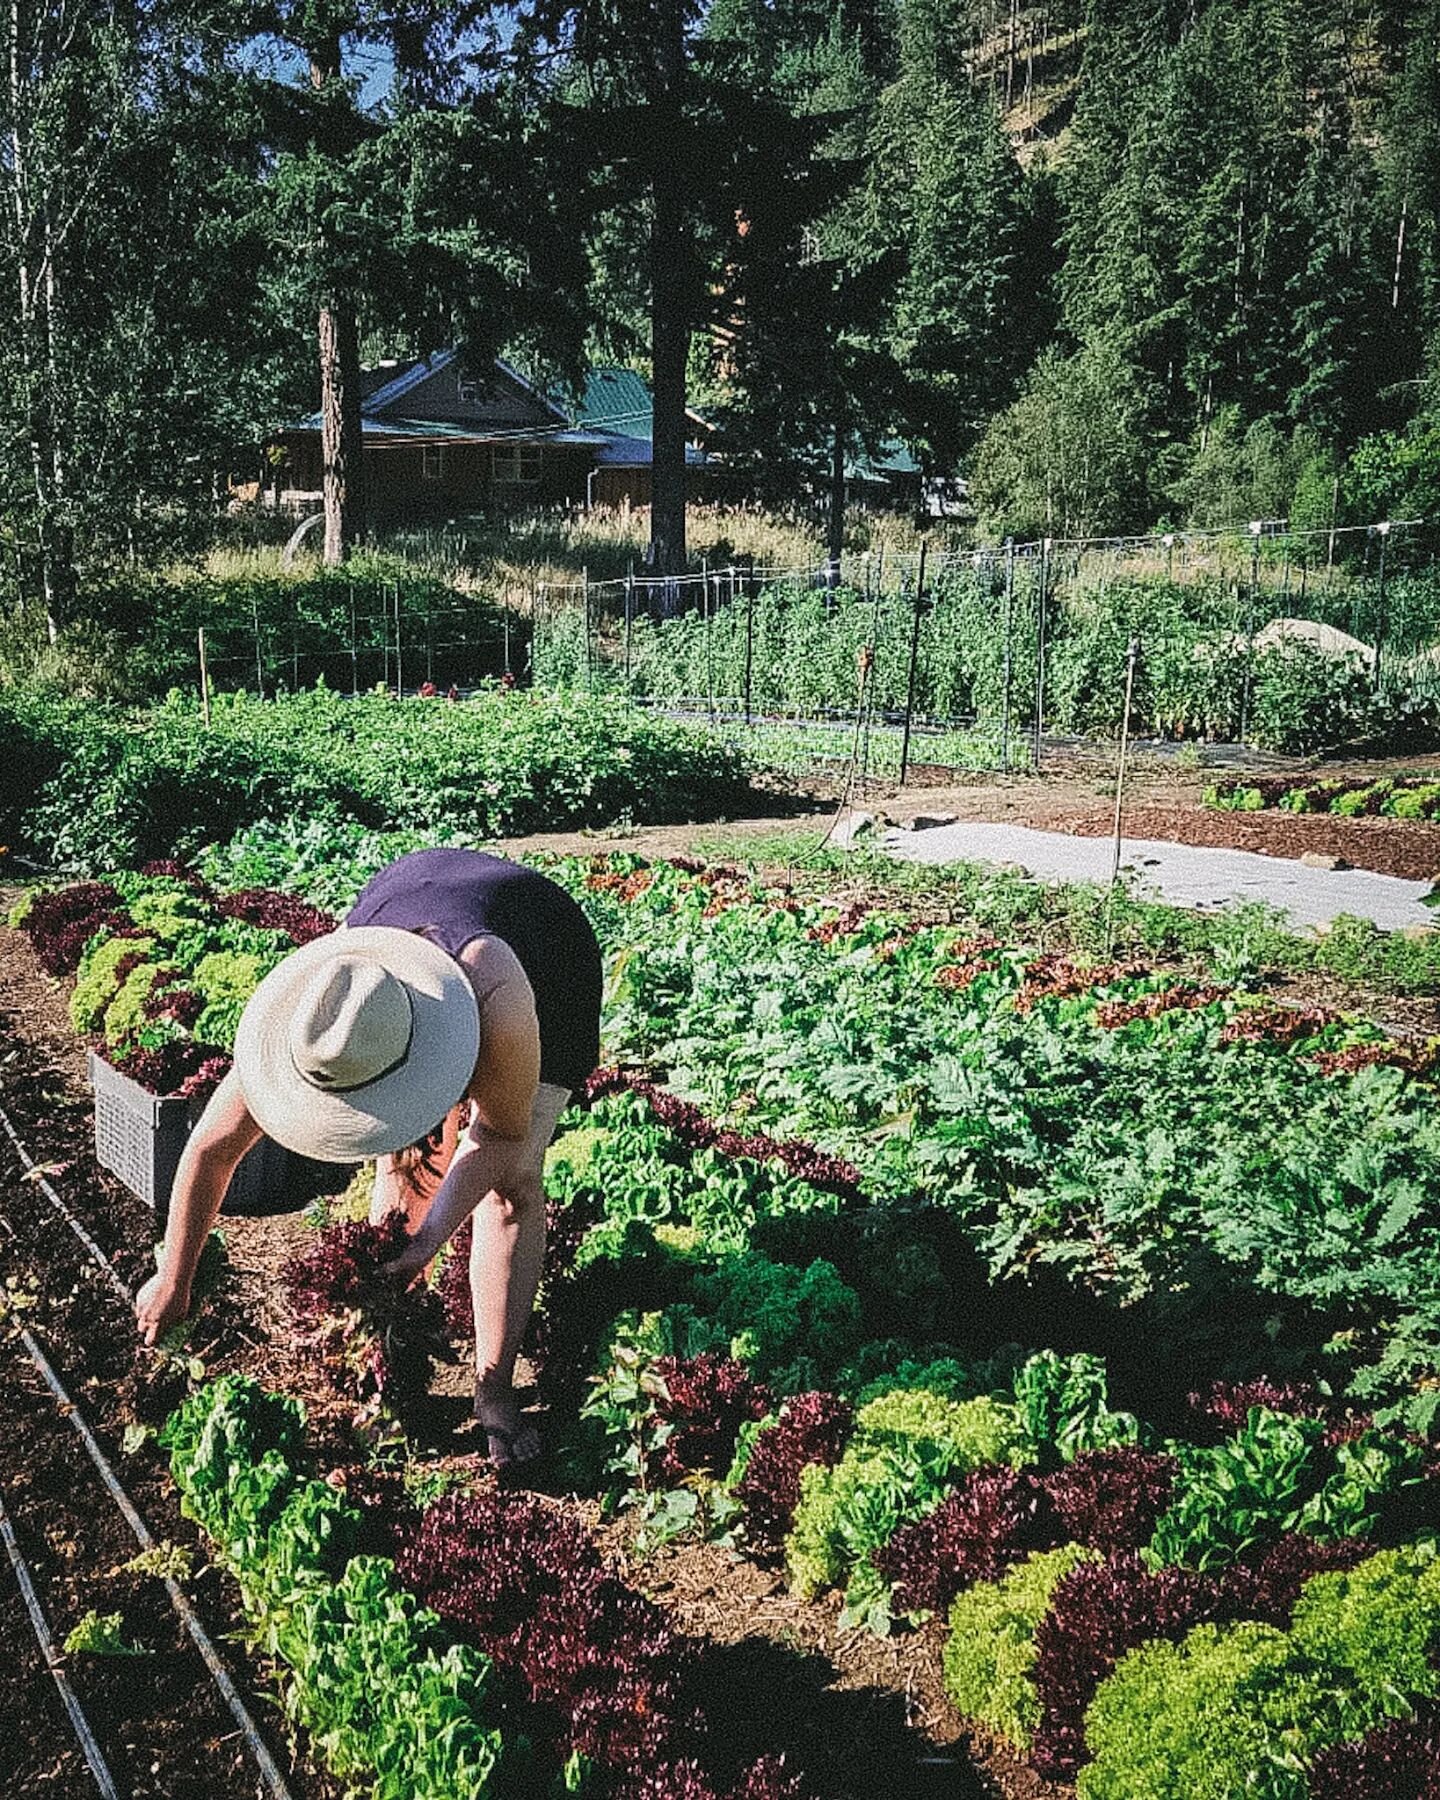 Good Morning from the garden. This morning I am busy pulling old lettuce out to make room to plant more radish and arugula. #notillmarketgarden #cropout #successionplanting #midsummerpush 📷 = @juscraw